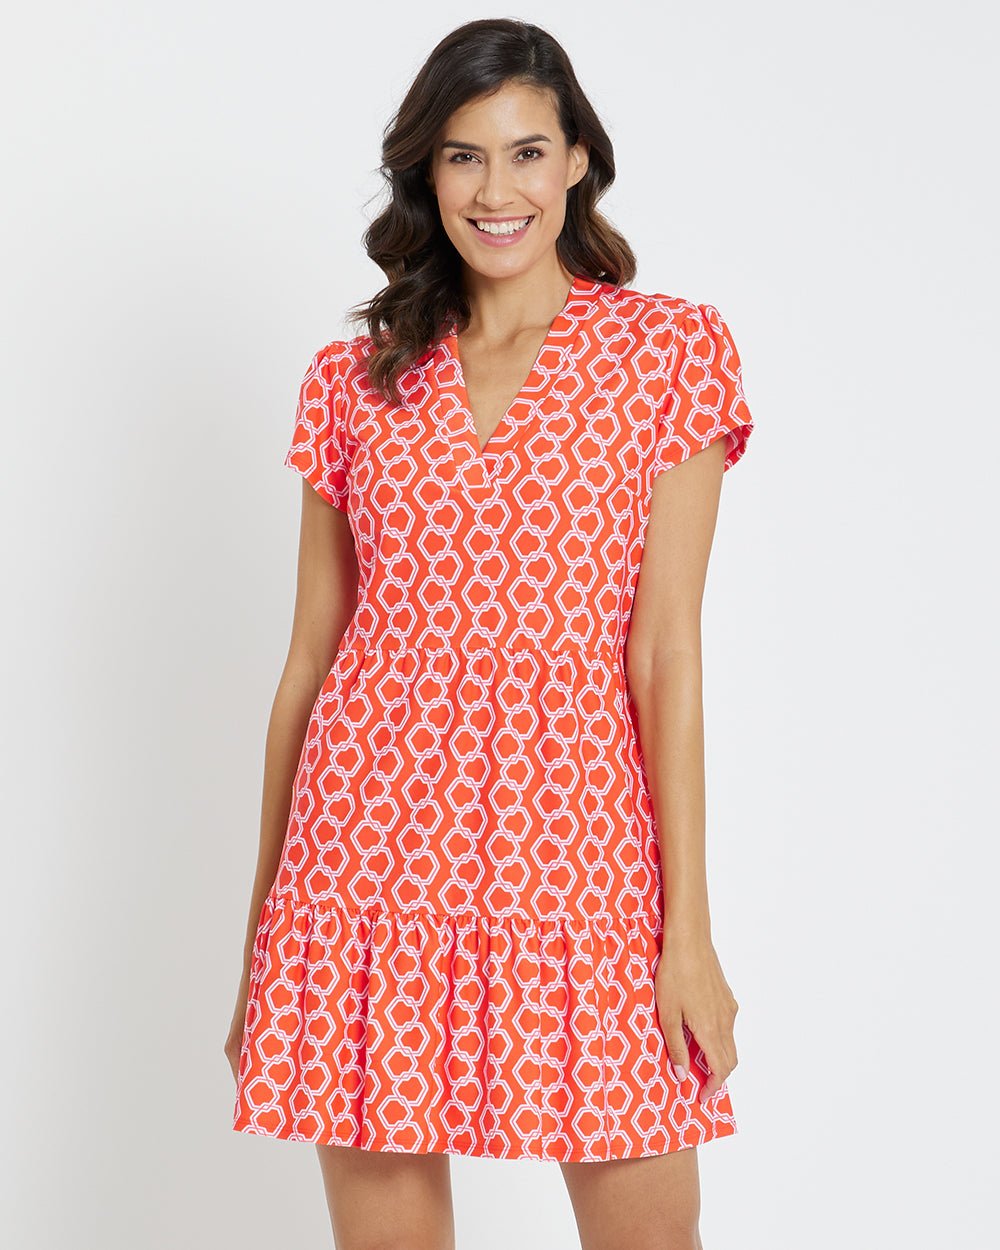 Jude Connally - Ginger Dancing Links Dress: Apricot - Shorely Chic Boutique